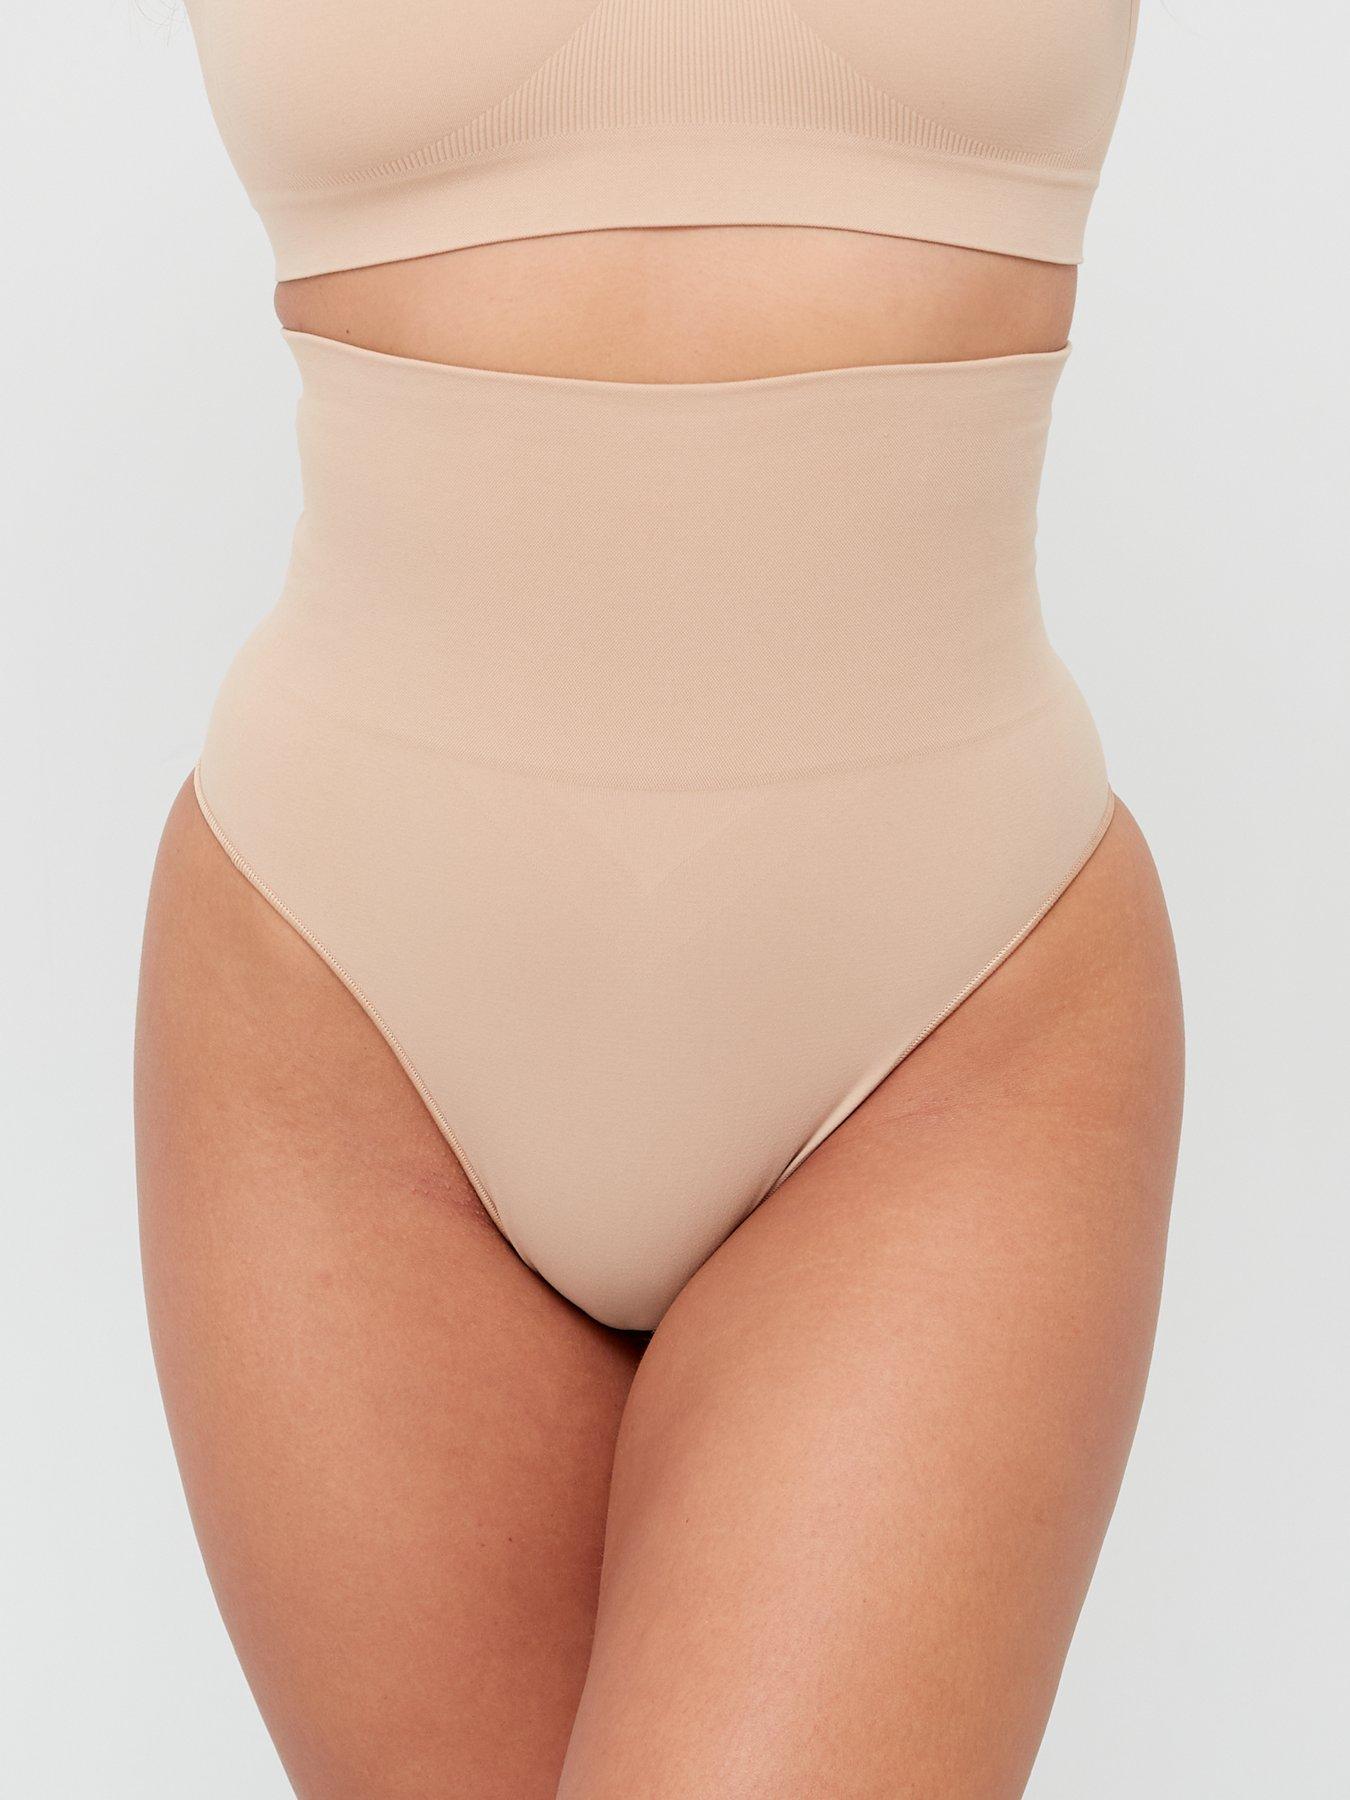 SURE YOU LIKE Women's Figure-Shaping Bodice Pants with Leg Shapewear High  Waist Body Shaper Stomach Control Effect Strong Shapes Immediately, beige :  : Fashion